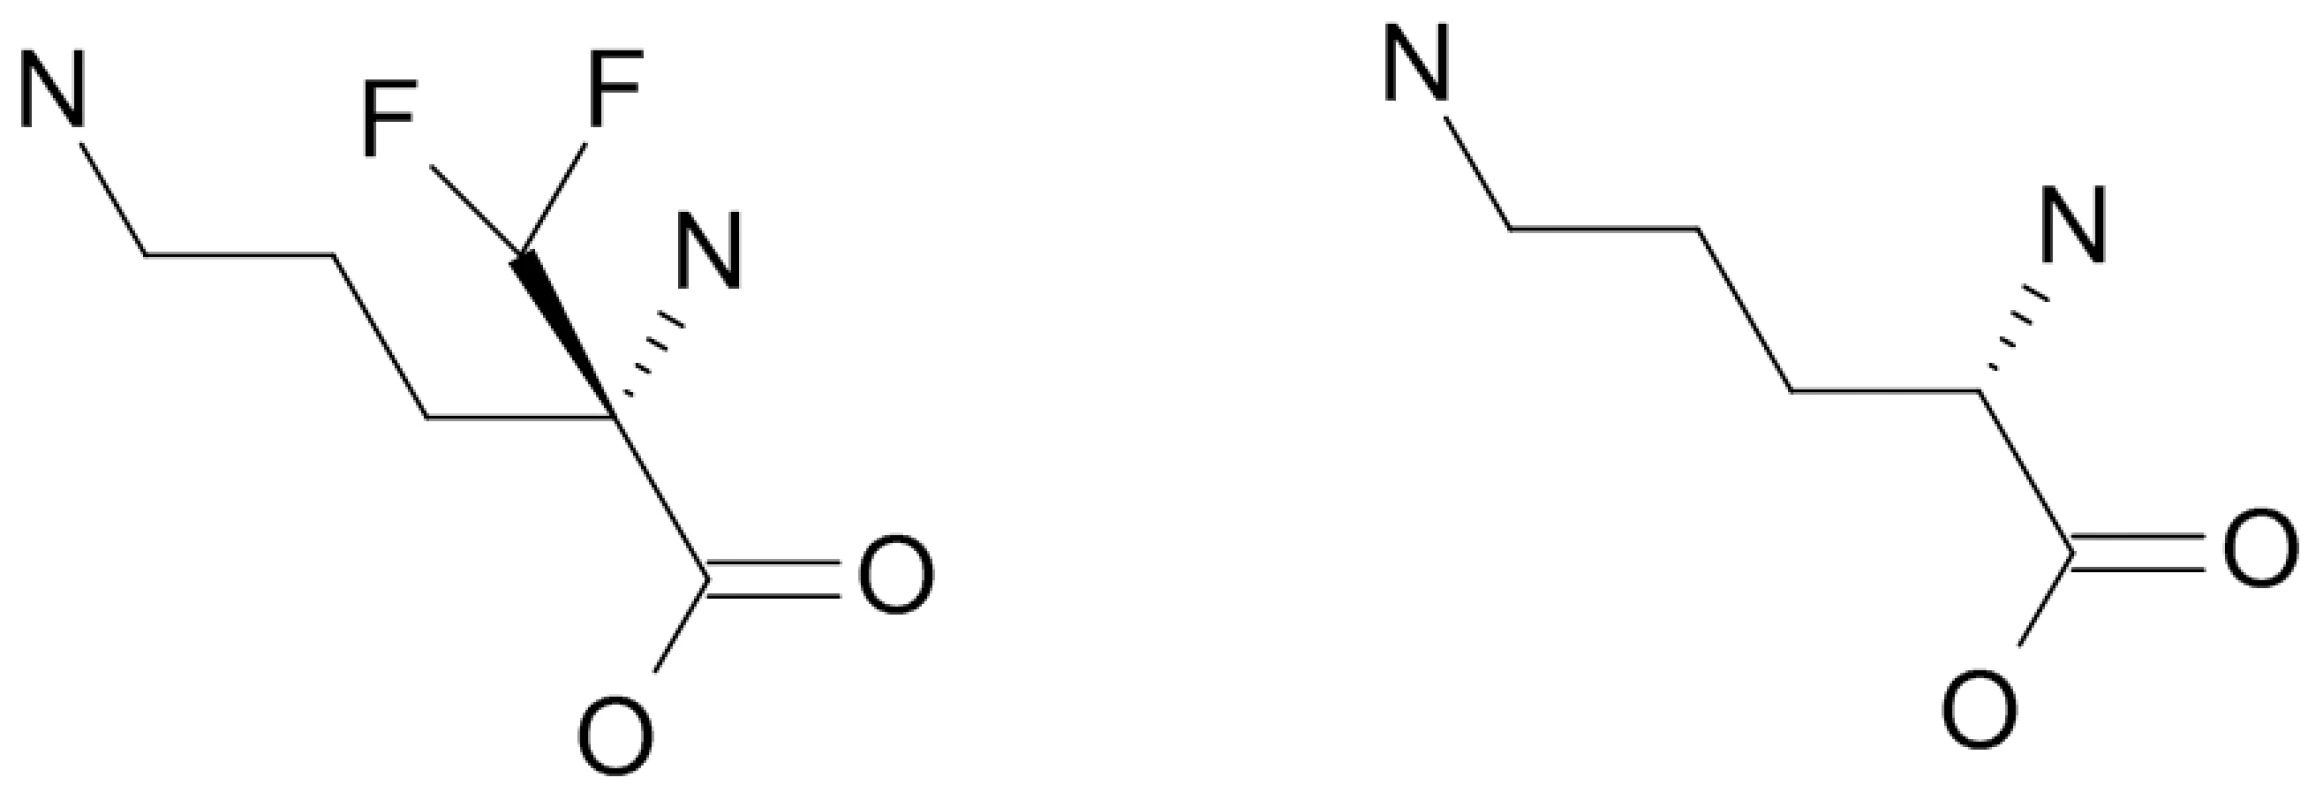 Eflornithine (left) is a derivative of ornithine (right).